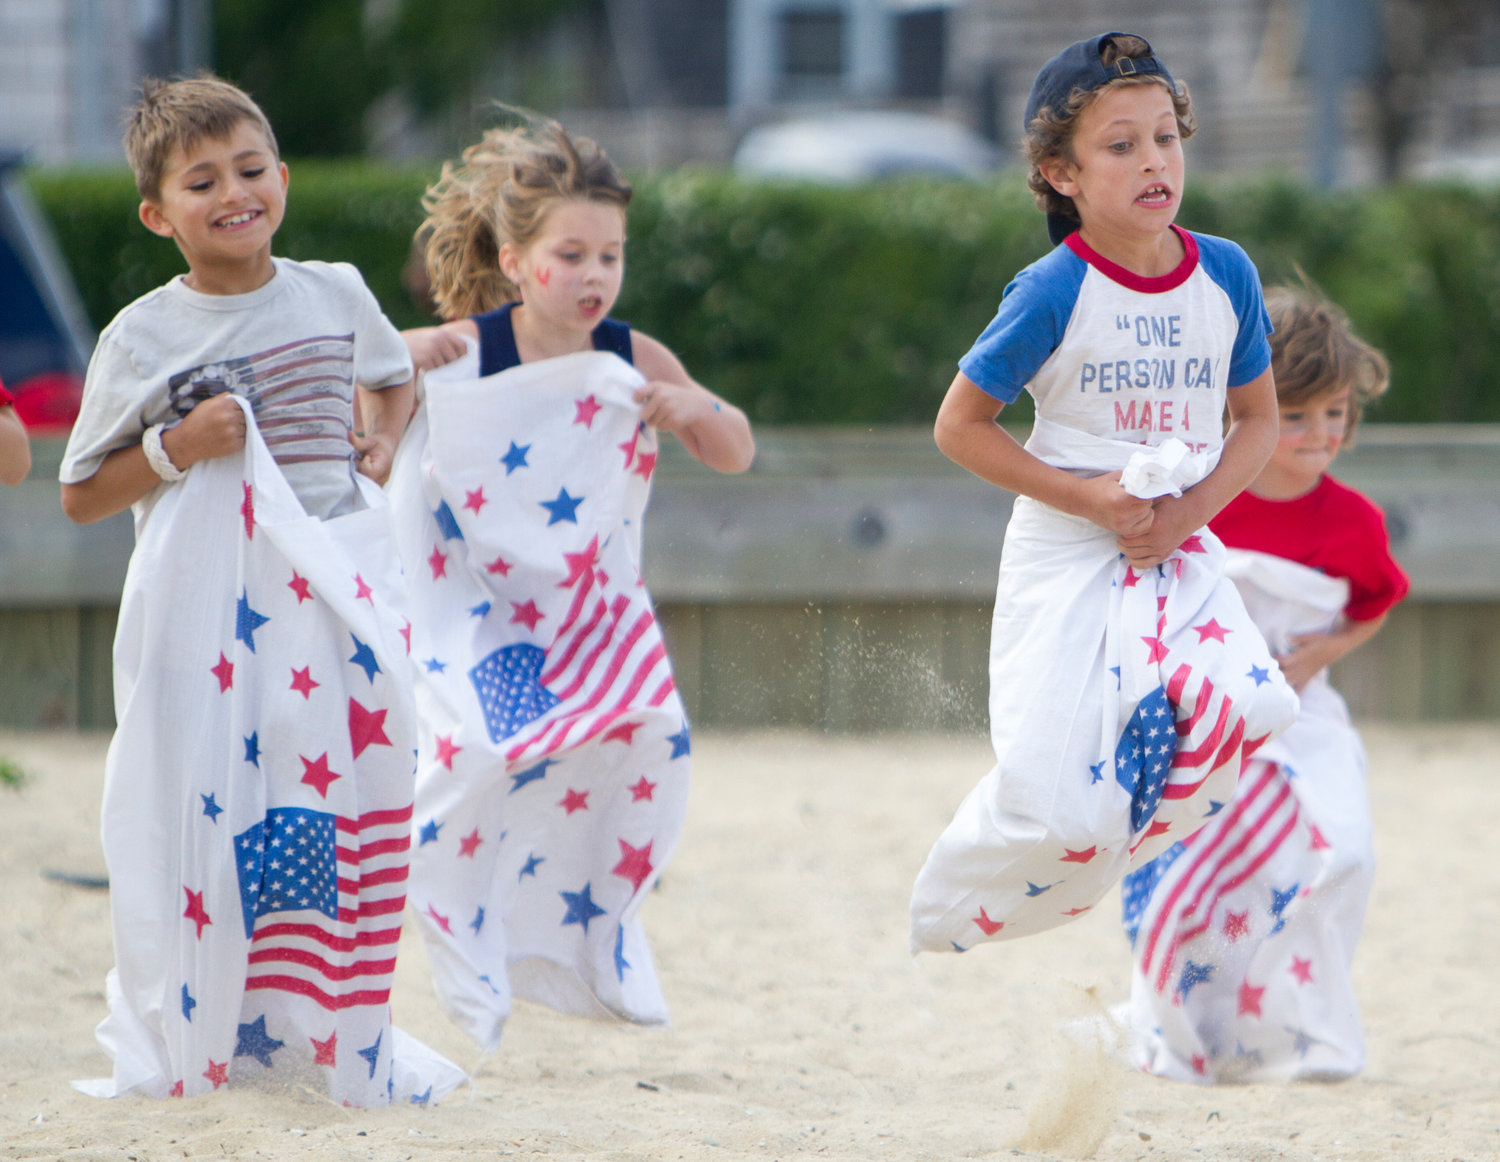 Sack races are just one of the family-friendly events scheduled for July 4 at Children’s Beach. There’s also live entertainment, a tug-of-war and more.